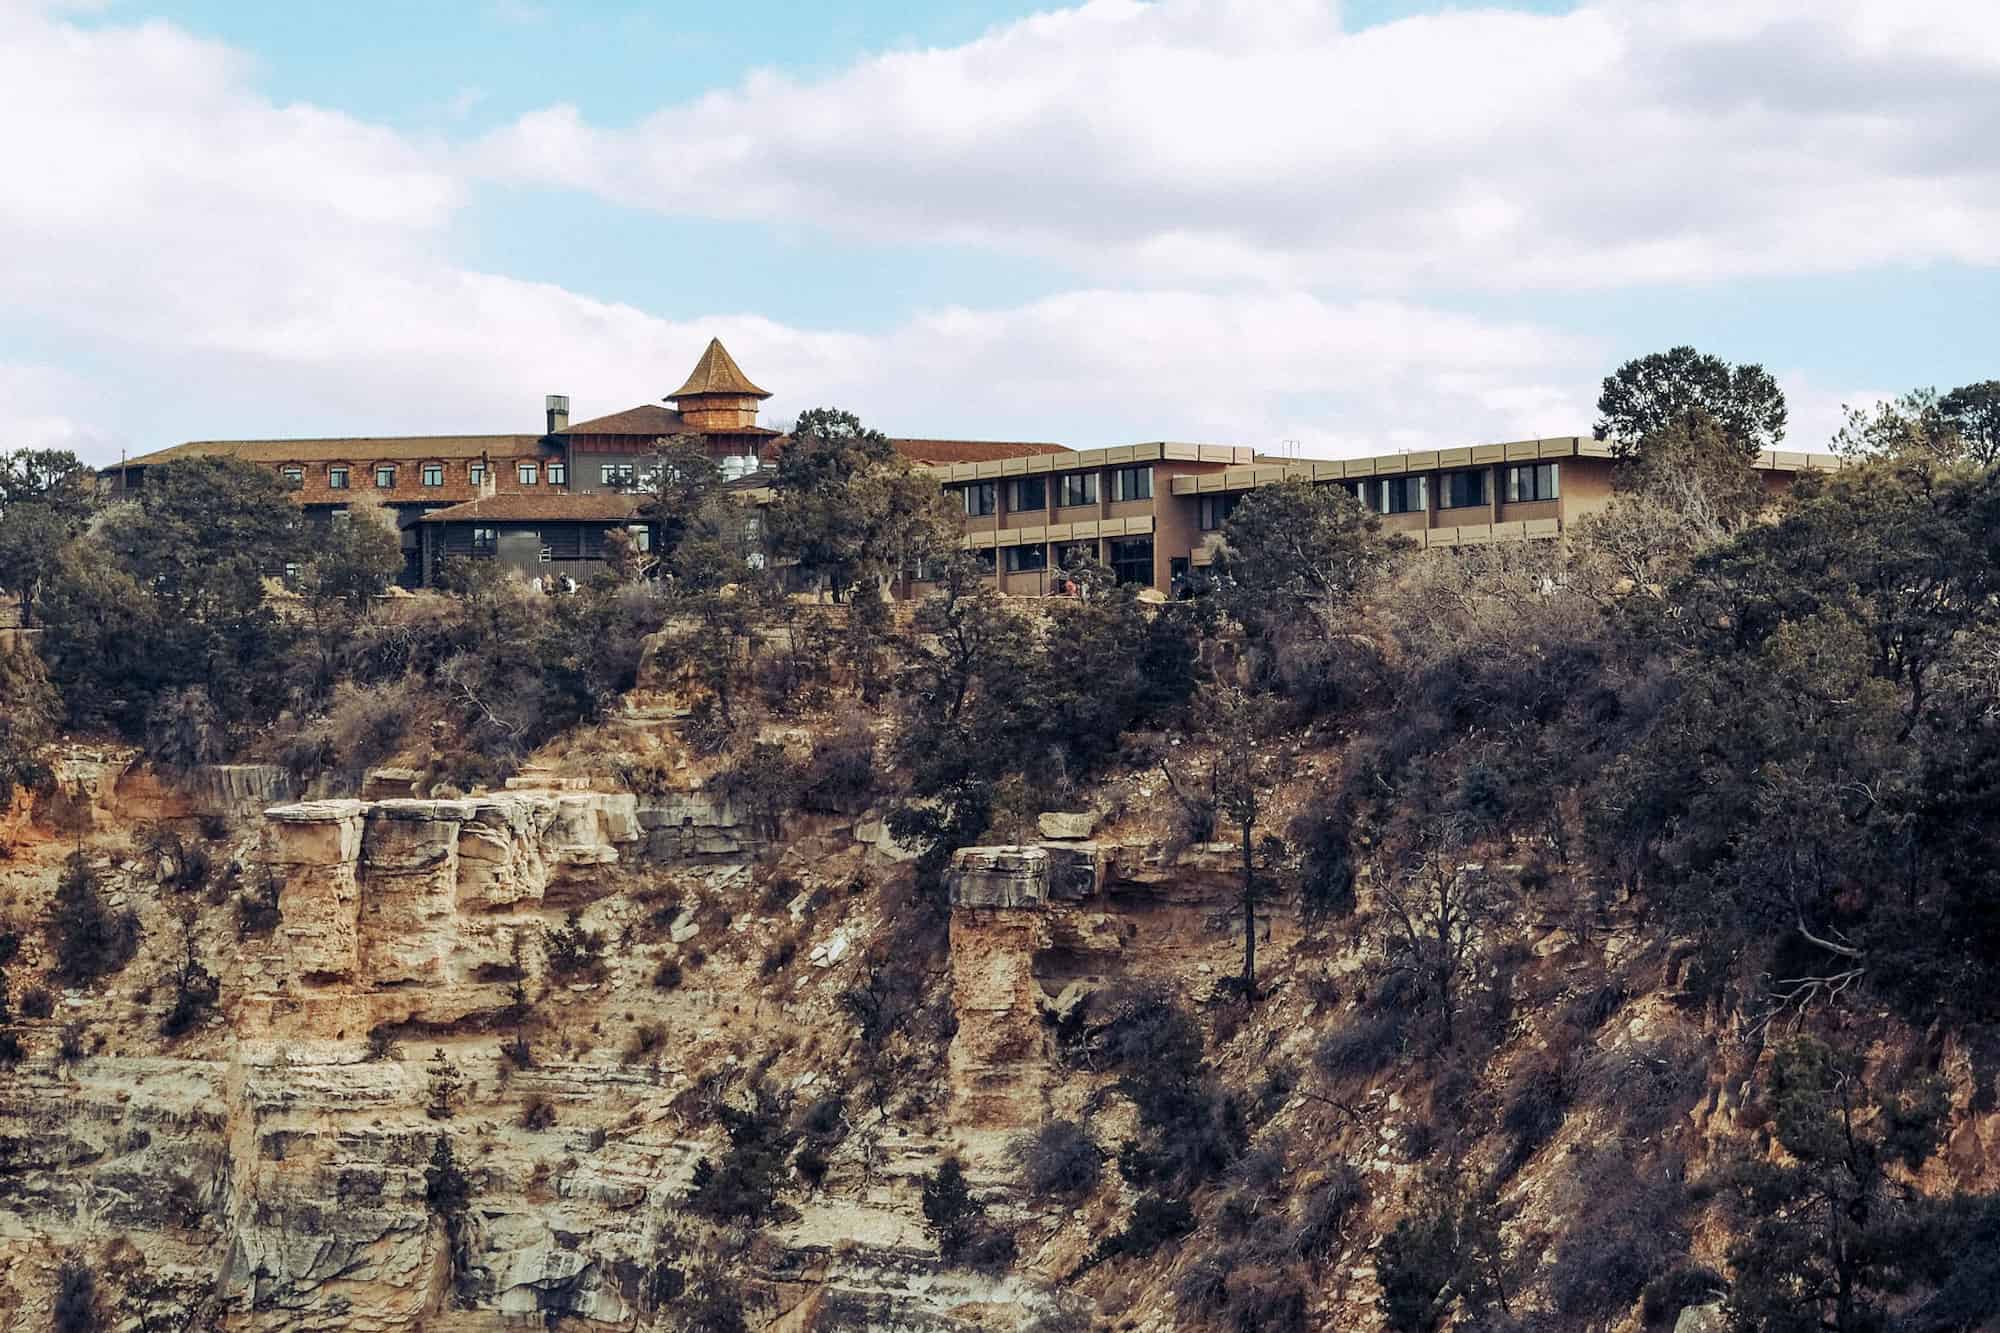 one of the hotels that sit within Grand Canyon National Park, seen along the canyon rim edge